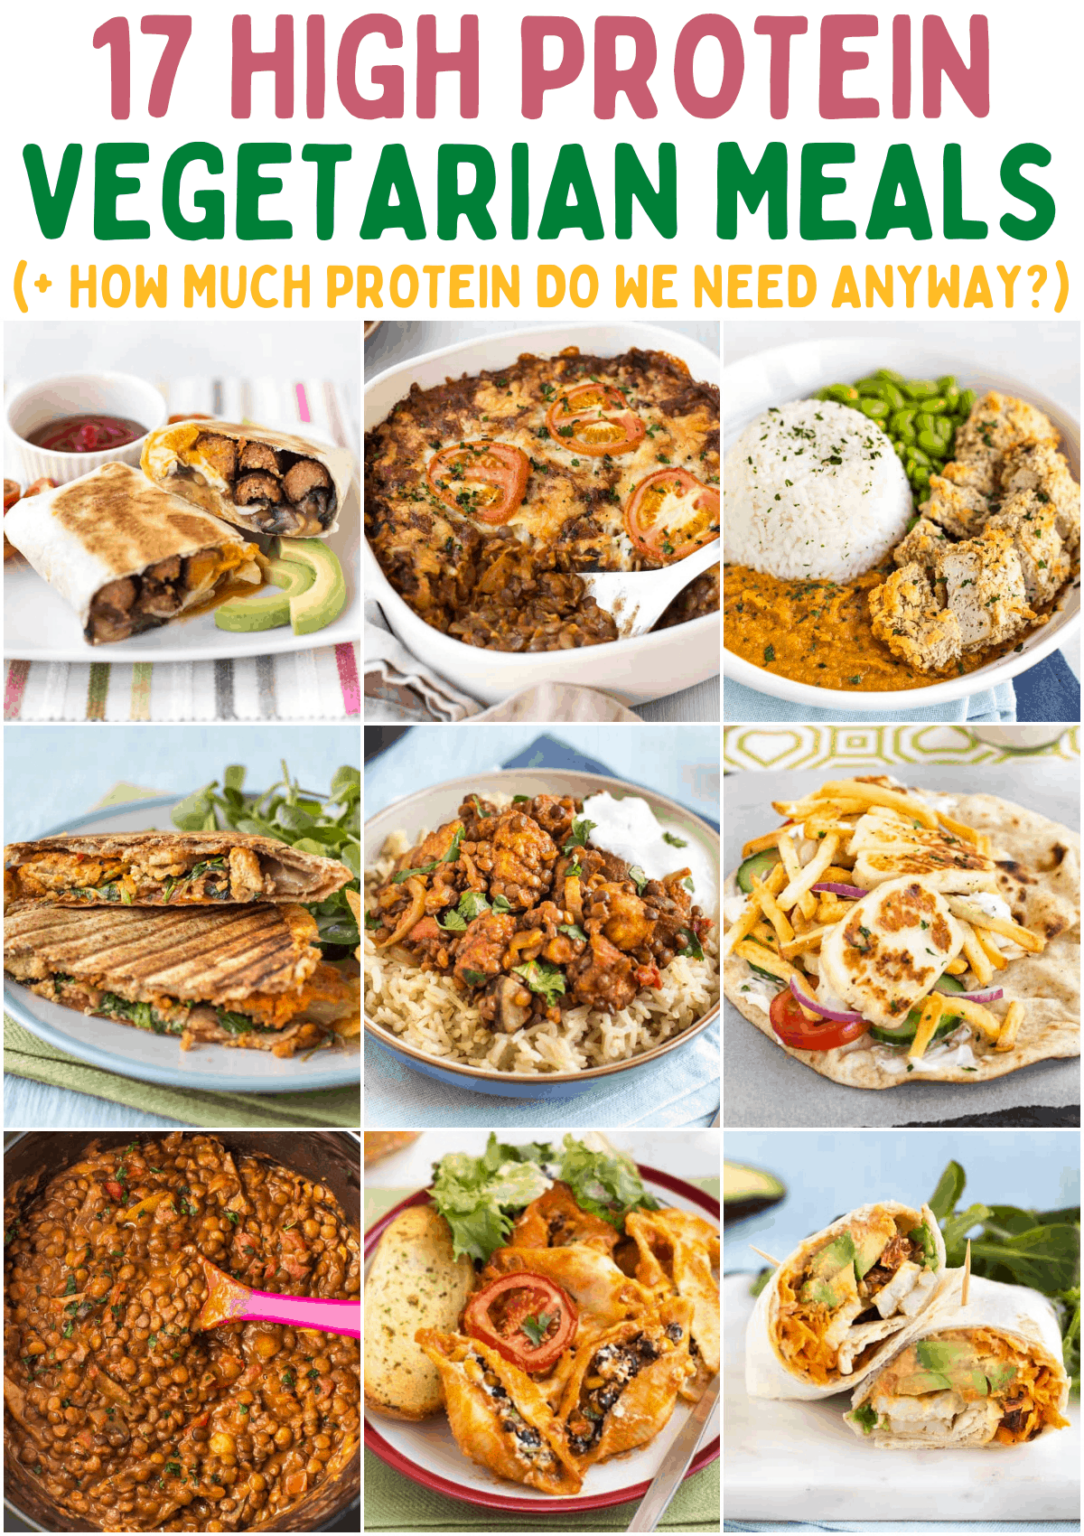 High Protein Vegetarian Meals How Much Protein Do We Need Anyway